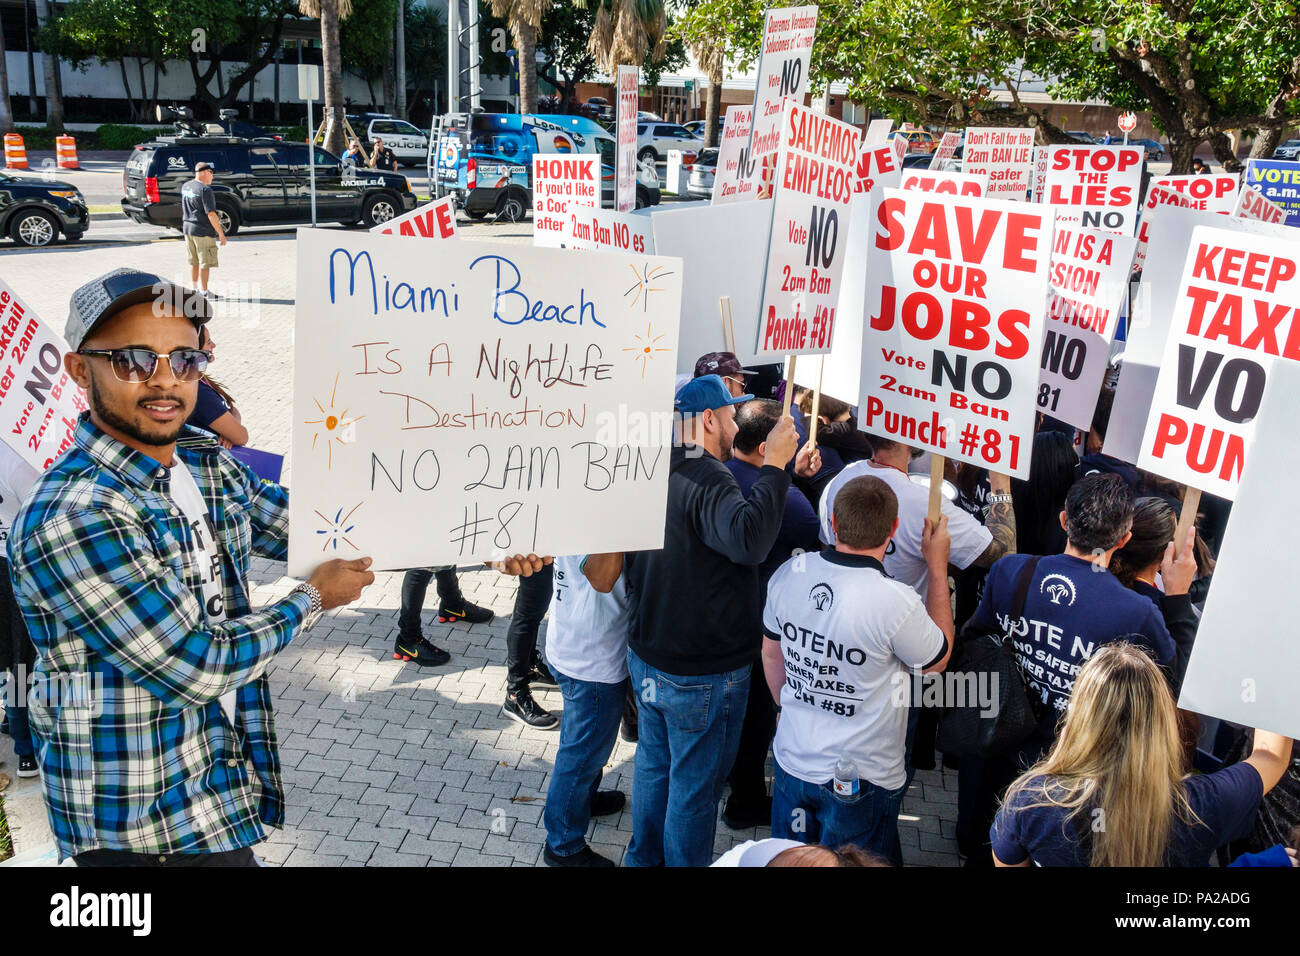 Miami Beach Florida,City Hall,hotel workers,protest protesting demonstration no serving alcohol liquor closing bars 2 AM jobs,ballot question,vote No, Stock Photo